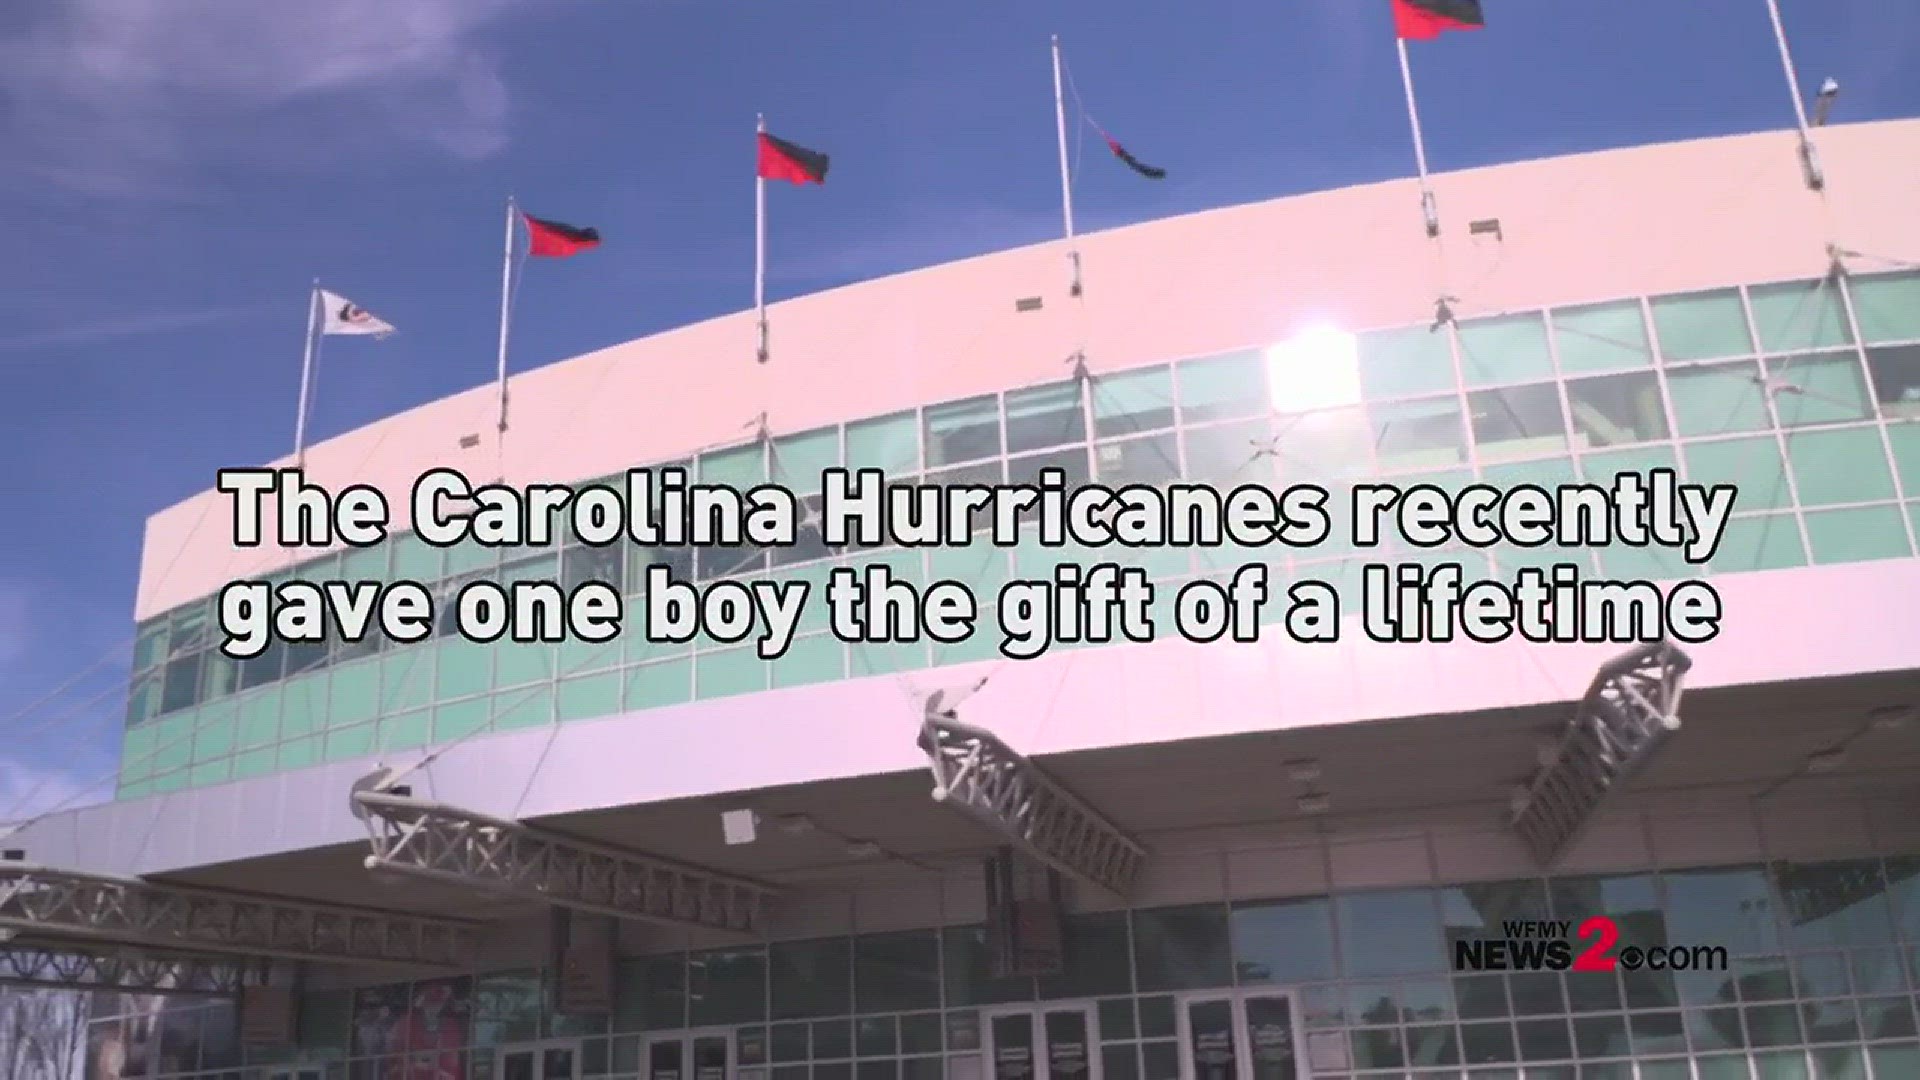 Carolina Hurricanes Grant Wish For 7-Year-Old With Cancer